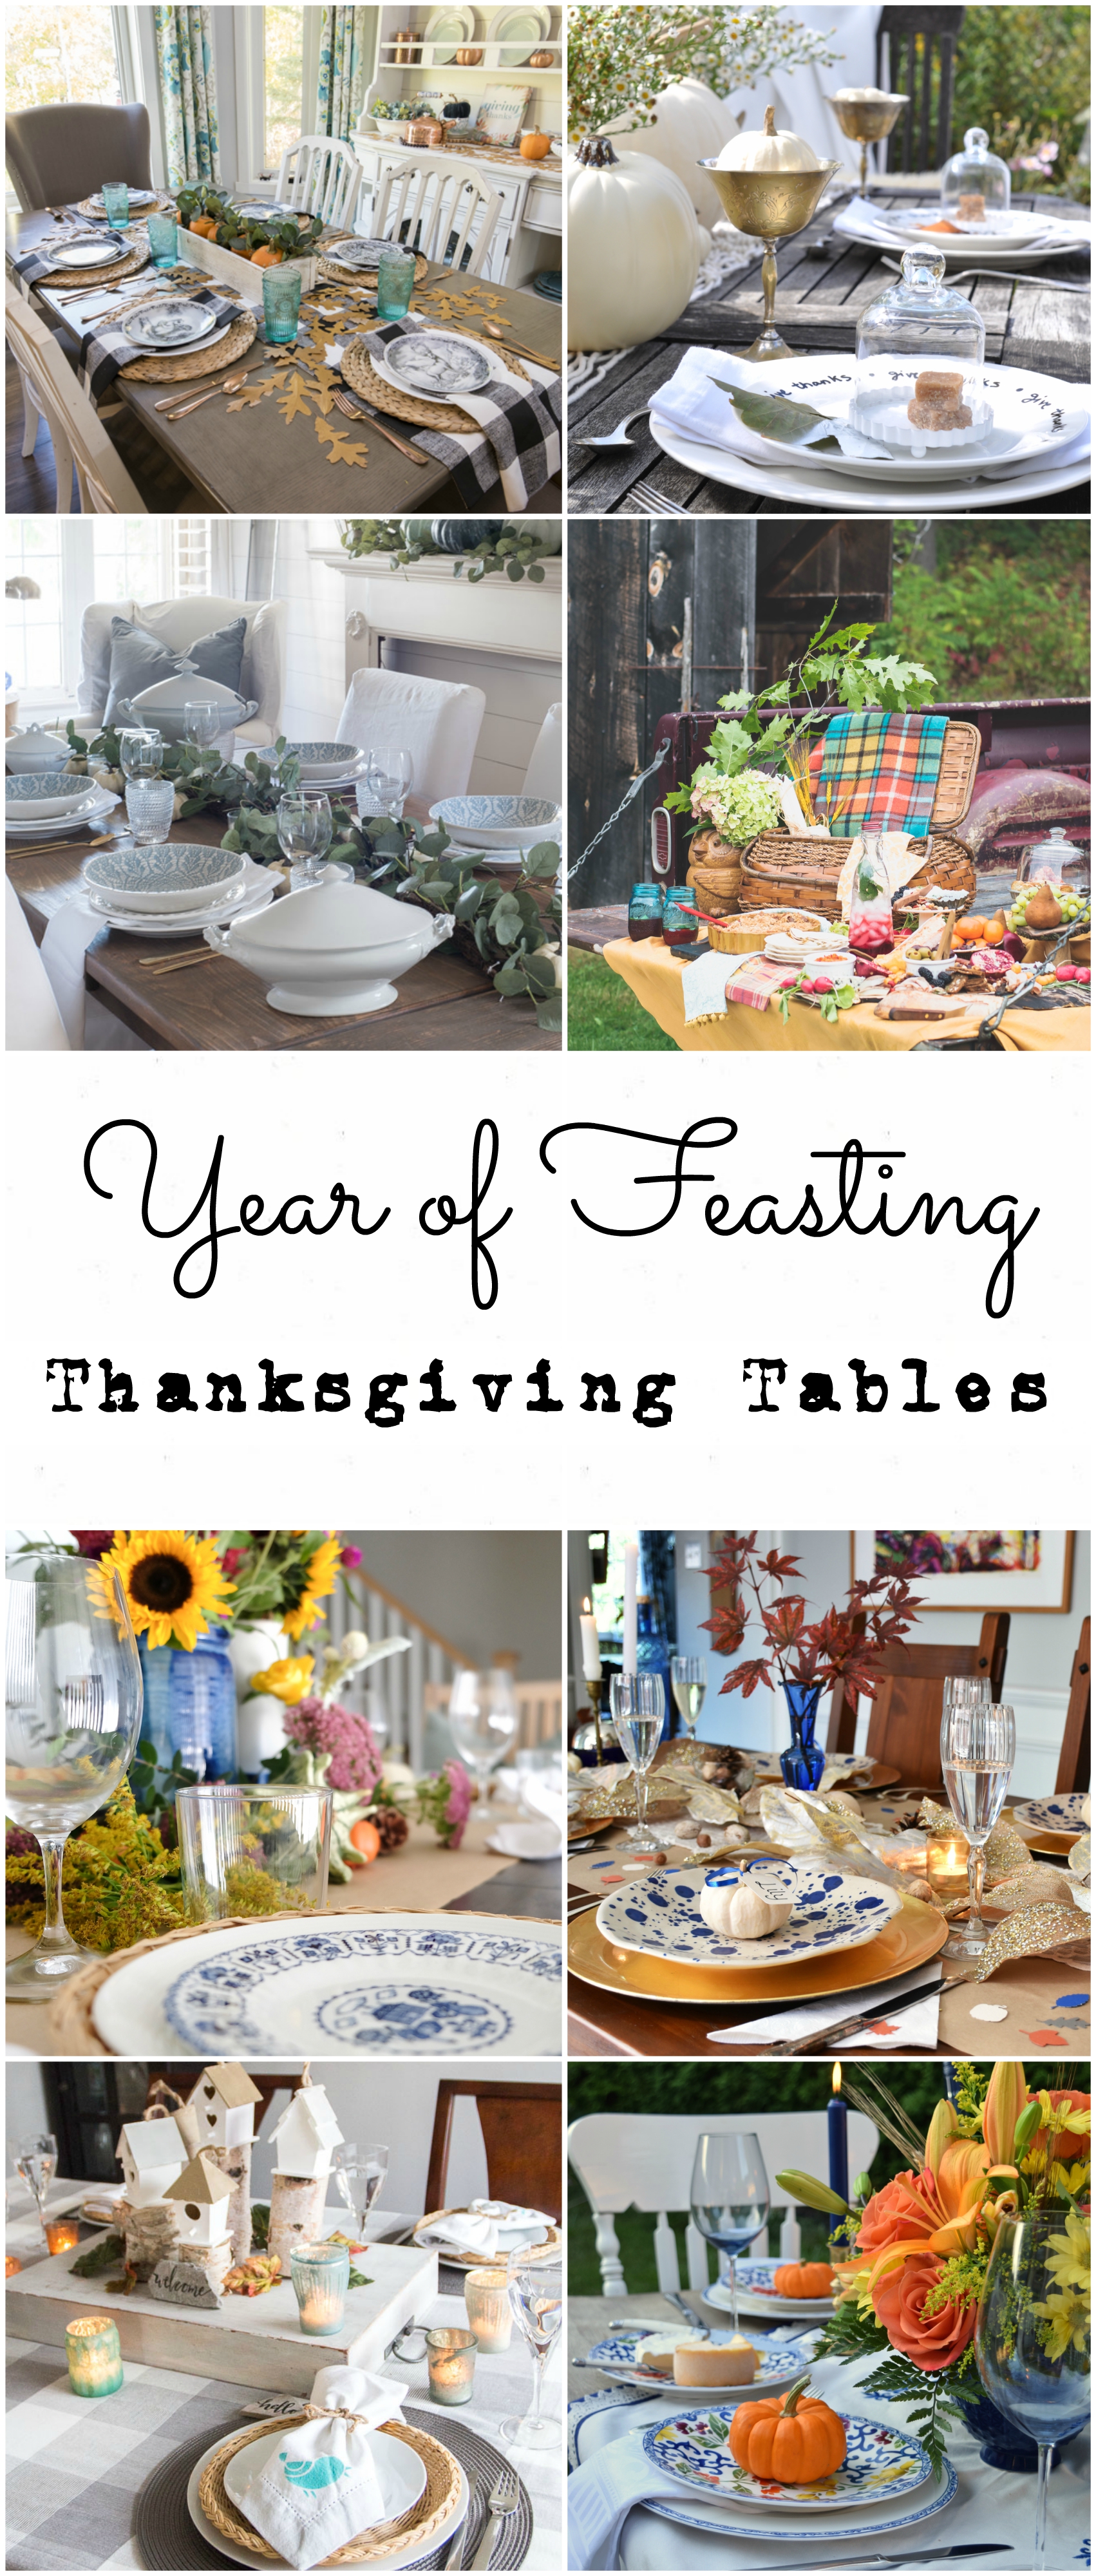 8 Gorgeous Thanksgiving Tables from Canadian decor and lifestyle bloggers